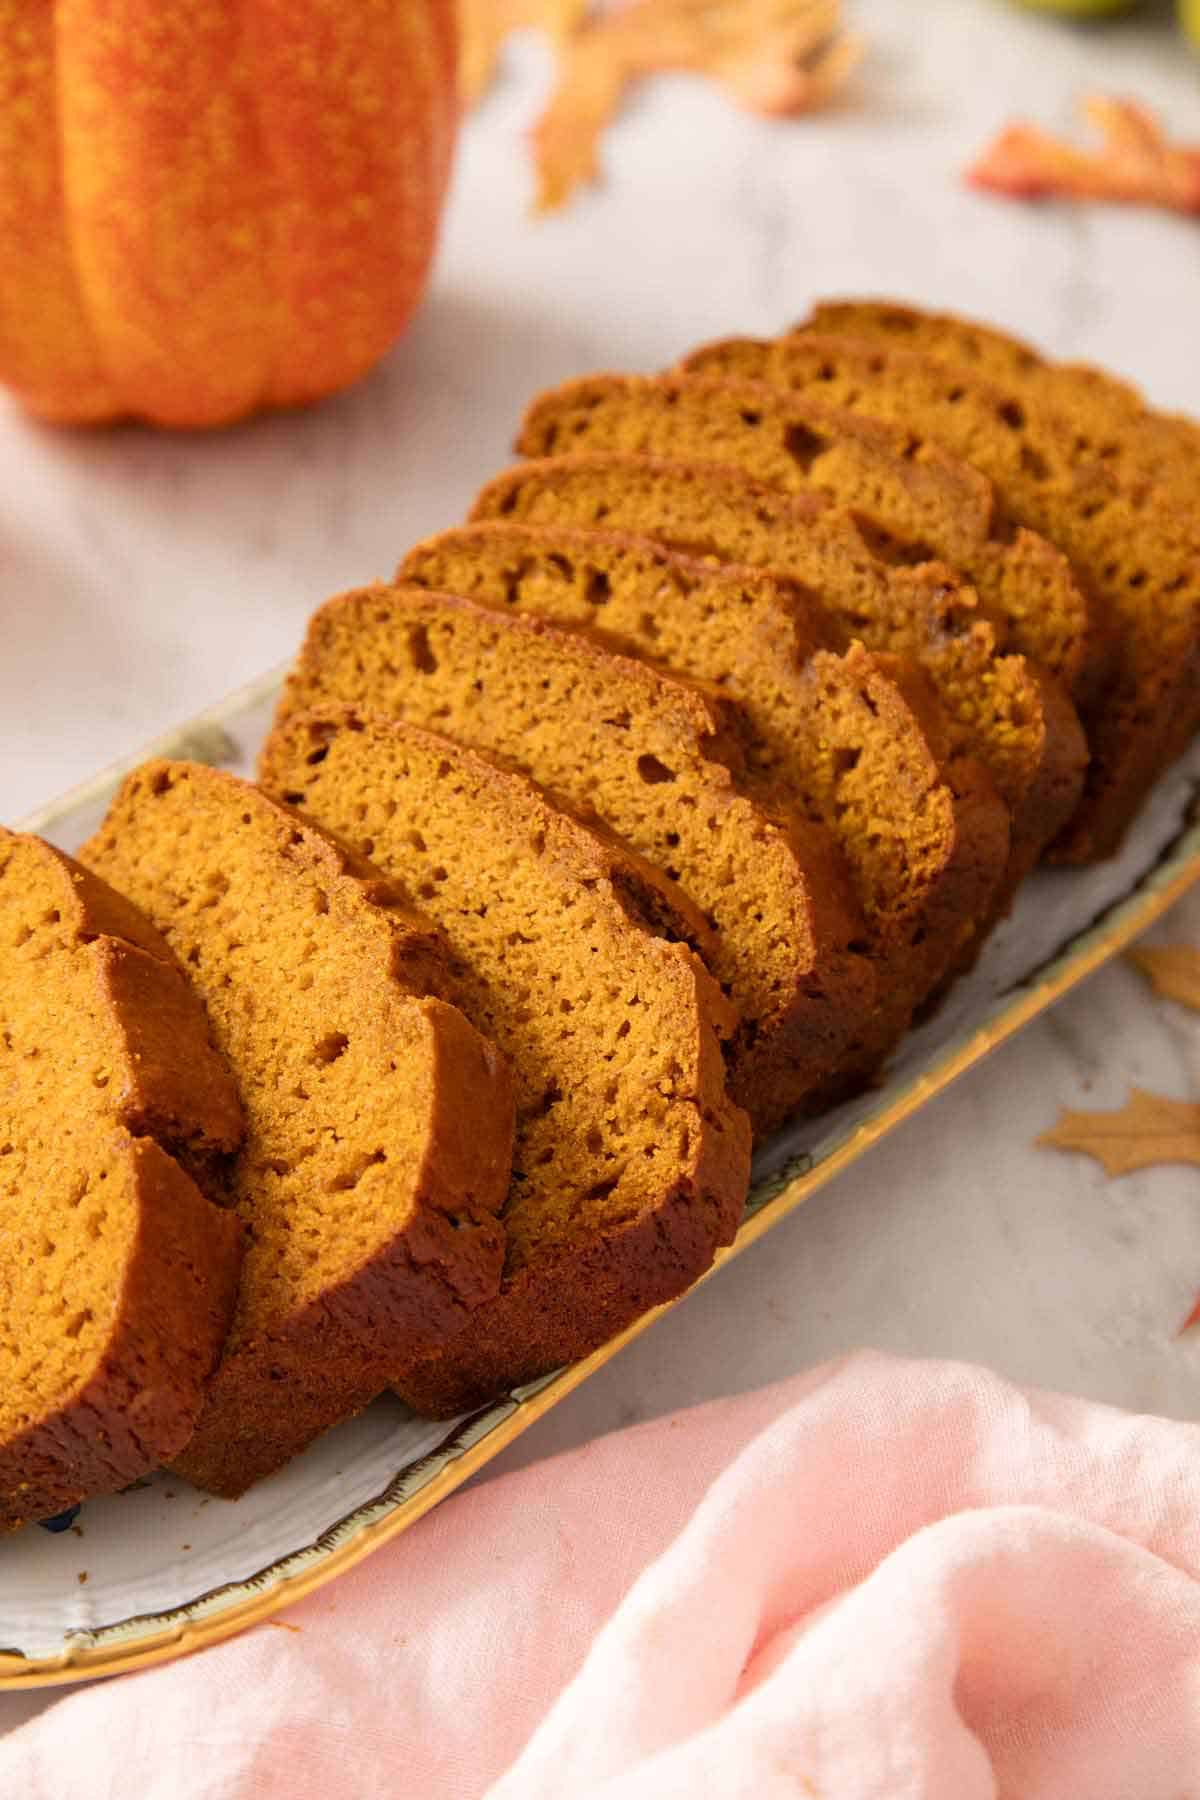 A platter with a loaf of pumpkin bread sliced.